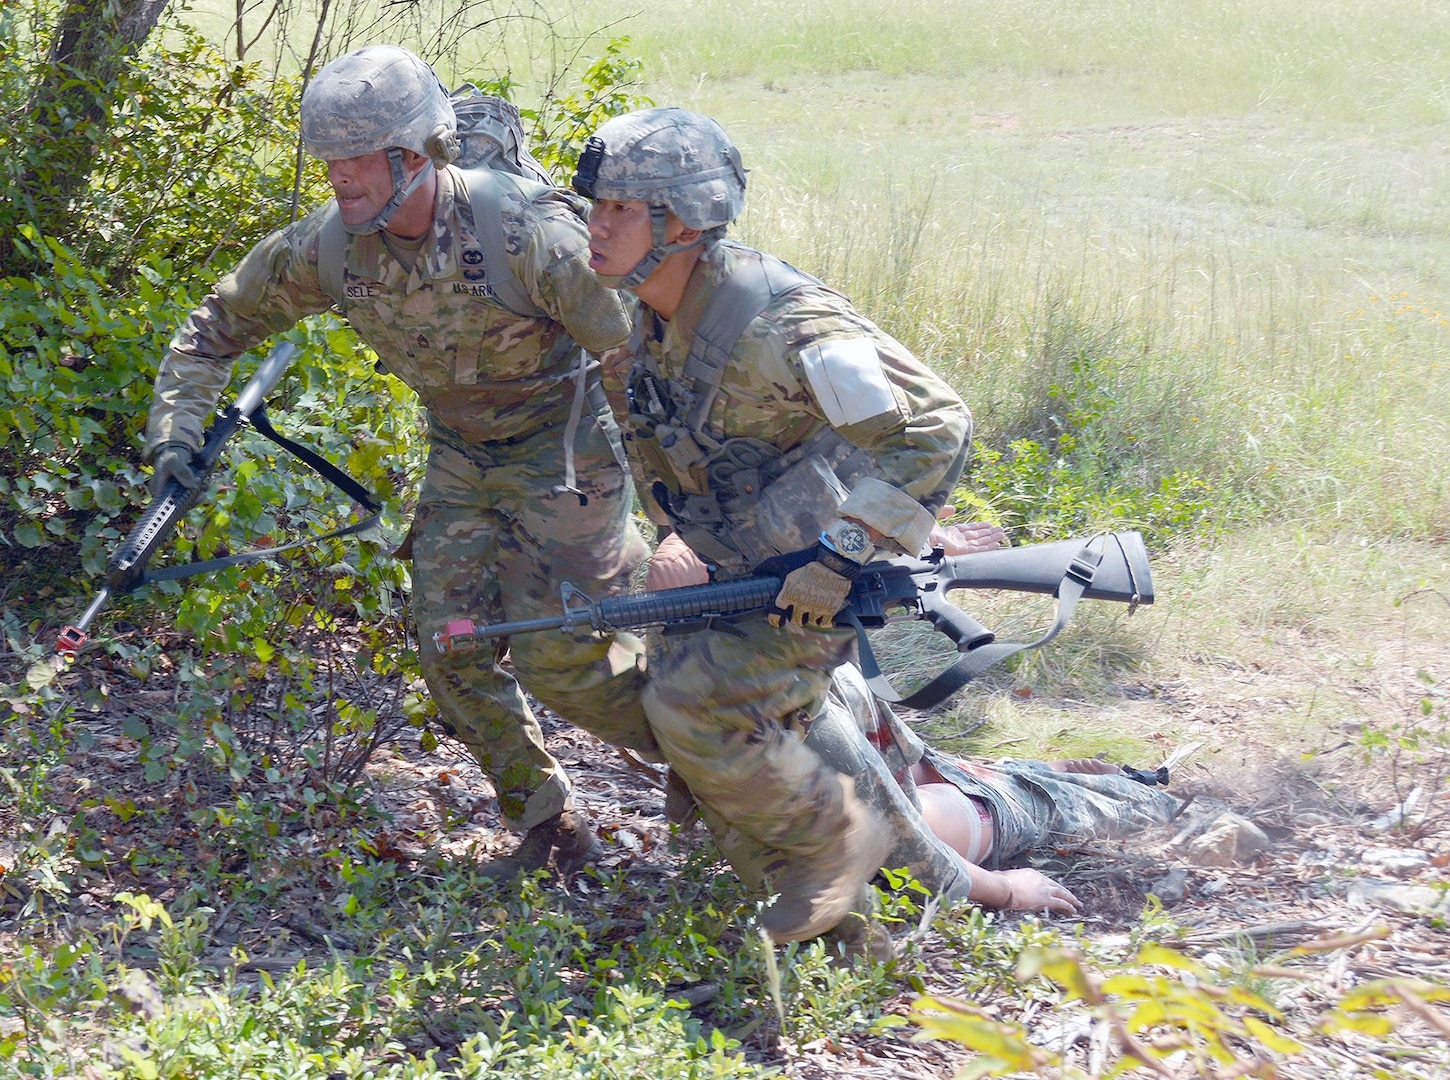 Sgt. 1st Class Stephen Eisele and 1st Lt. Chi Wing Pang from Brooke Army Medical Center drag a simulated casualty to safety during the Regional Health Command-Central (Provisional) 2016 Best Medic Competition at Camp Bullis Sept. 21. The combat medic lane tests the candidates’ ability to perform casualty care as well as their ability to evacuate wounded.